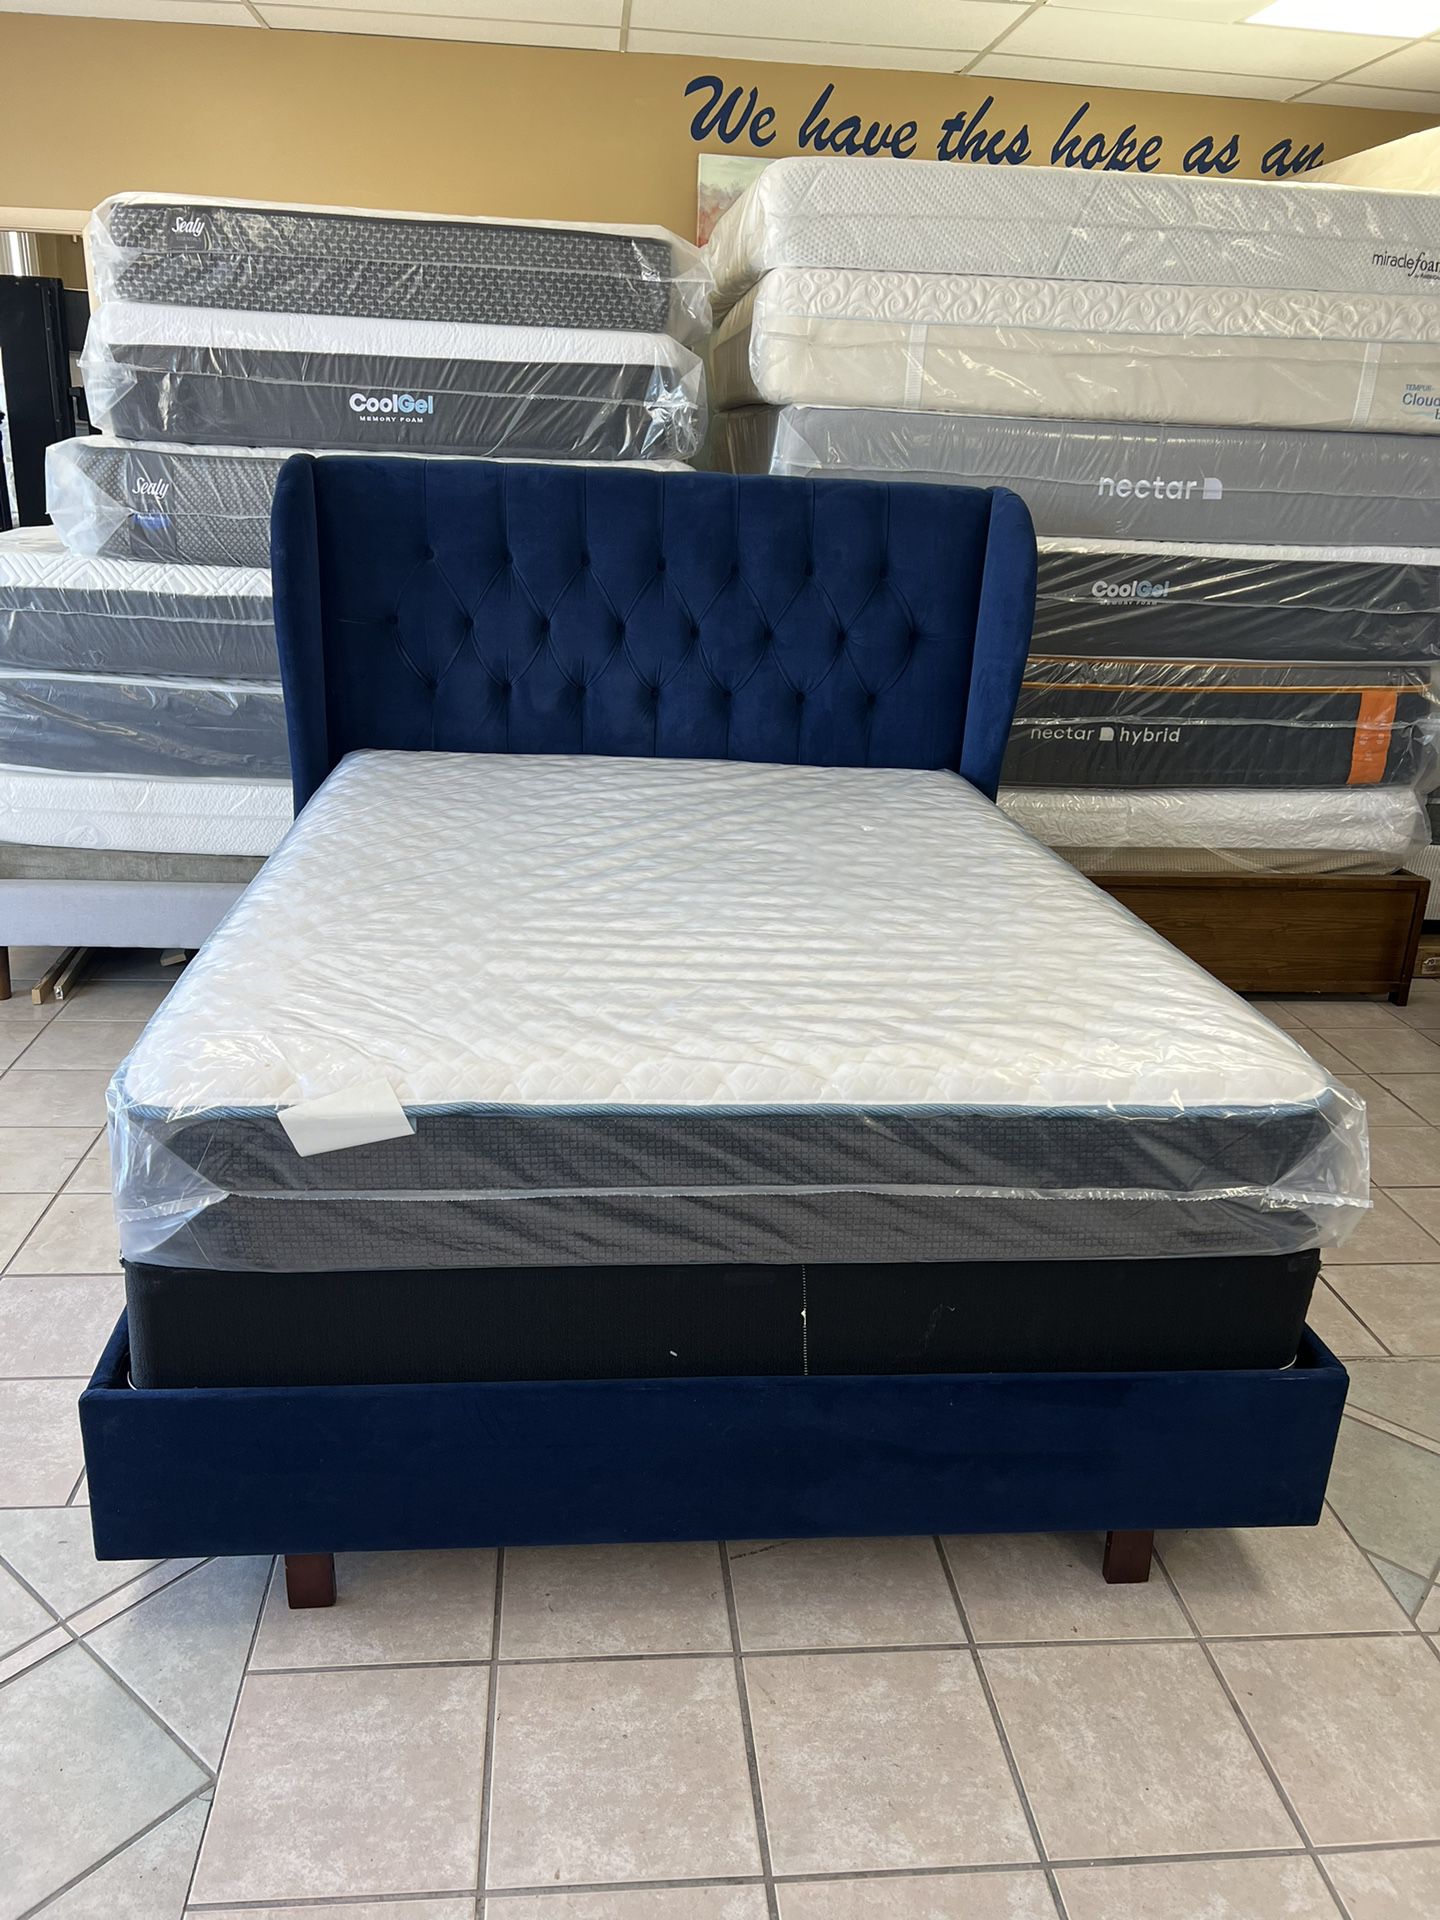 Queen Size Bed Mattress, And Boxspring Included🚛🚛 Free Delivery🚛🚛